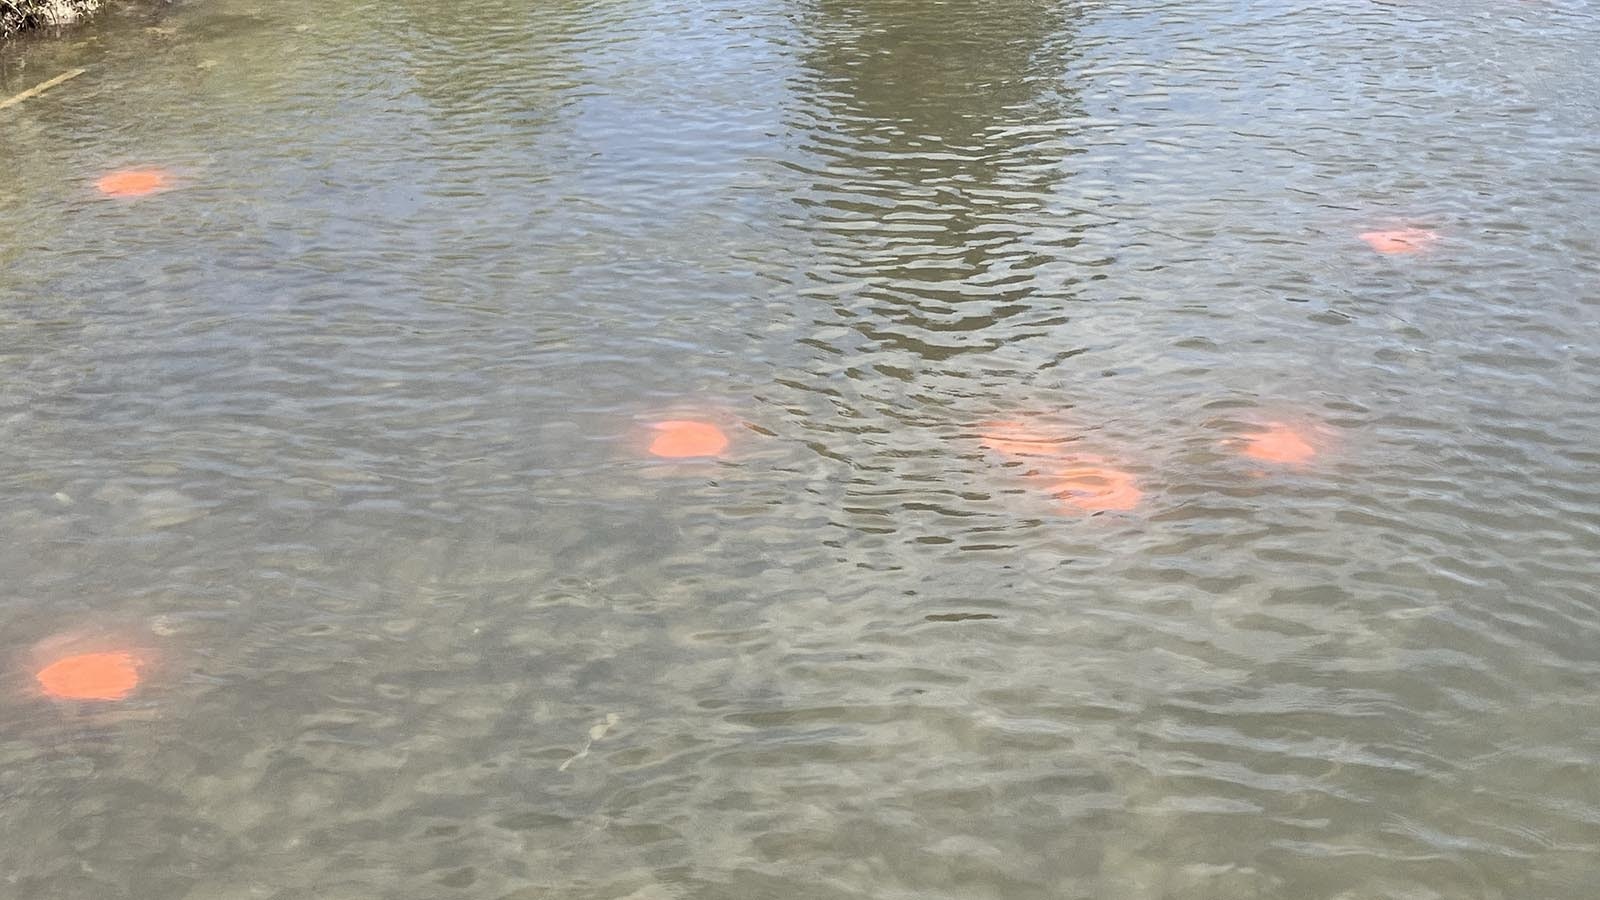 Avid angler and part-time Wyoming resident Tommy Martinez found these orange shotgun targets, commonly called clay pigeons, littering the Buffalo Fork River near a campground on Thursday.